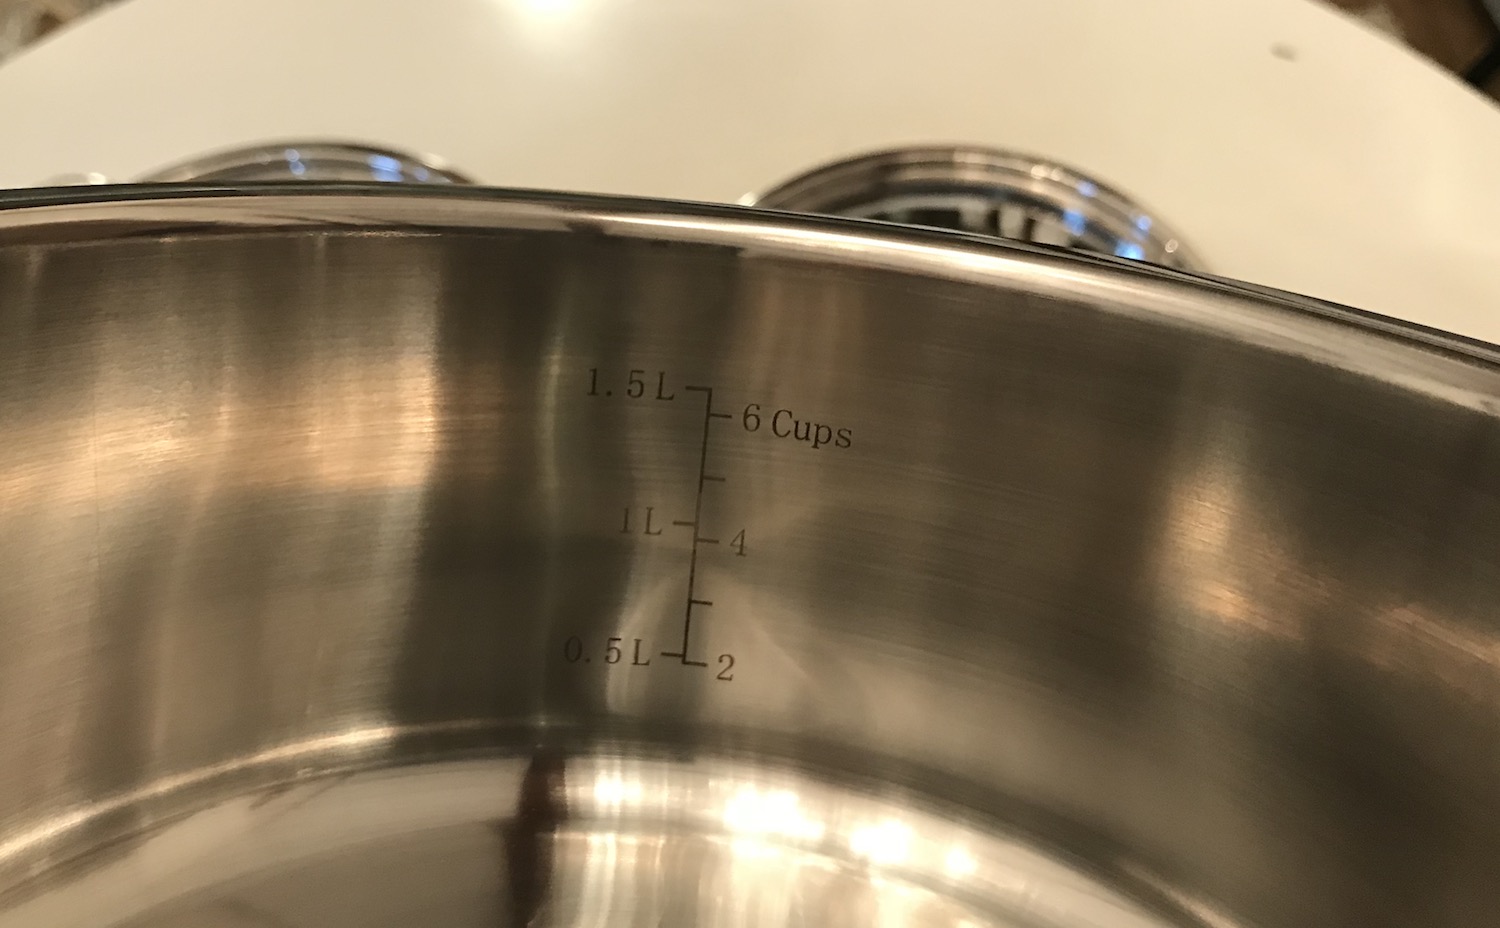 Cuisinart meauring label pots and pans